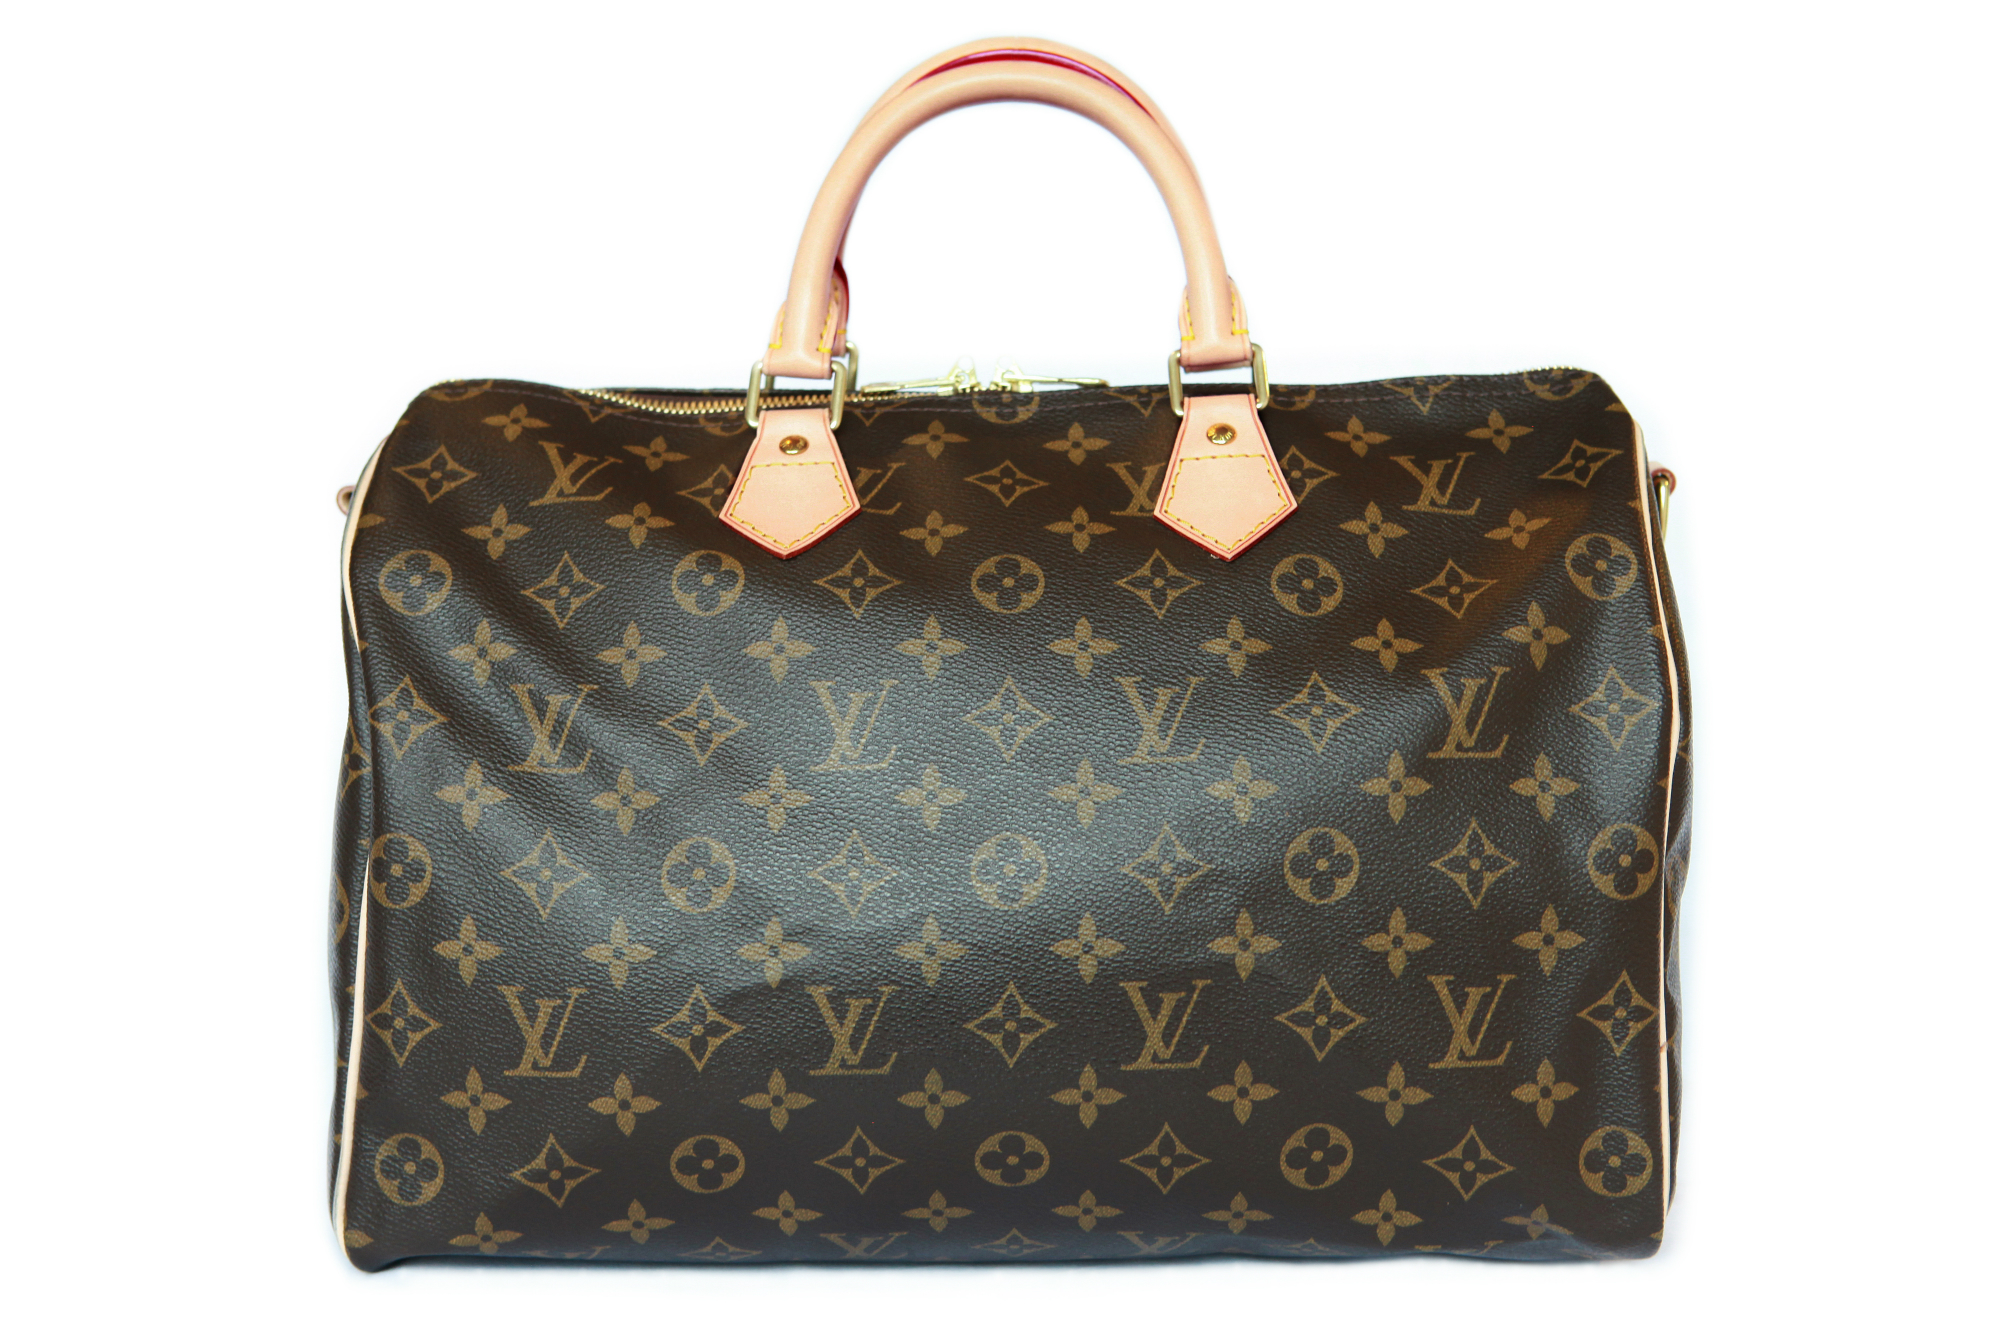 Picture Of Louis Vuitton Speedy | Confederated Tribes of the Umatilla Indian Reservation